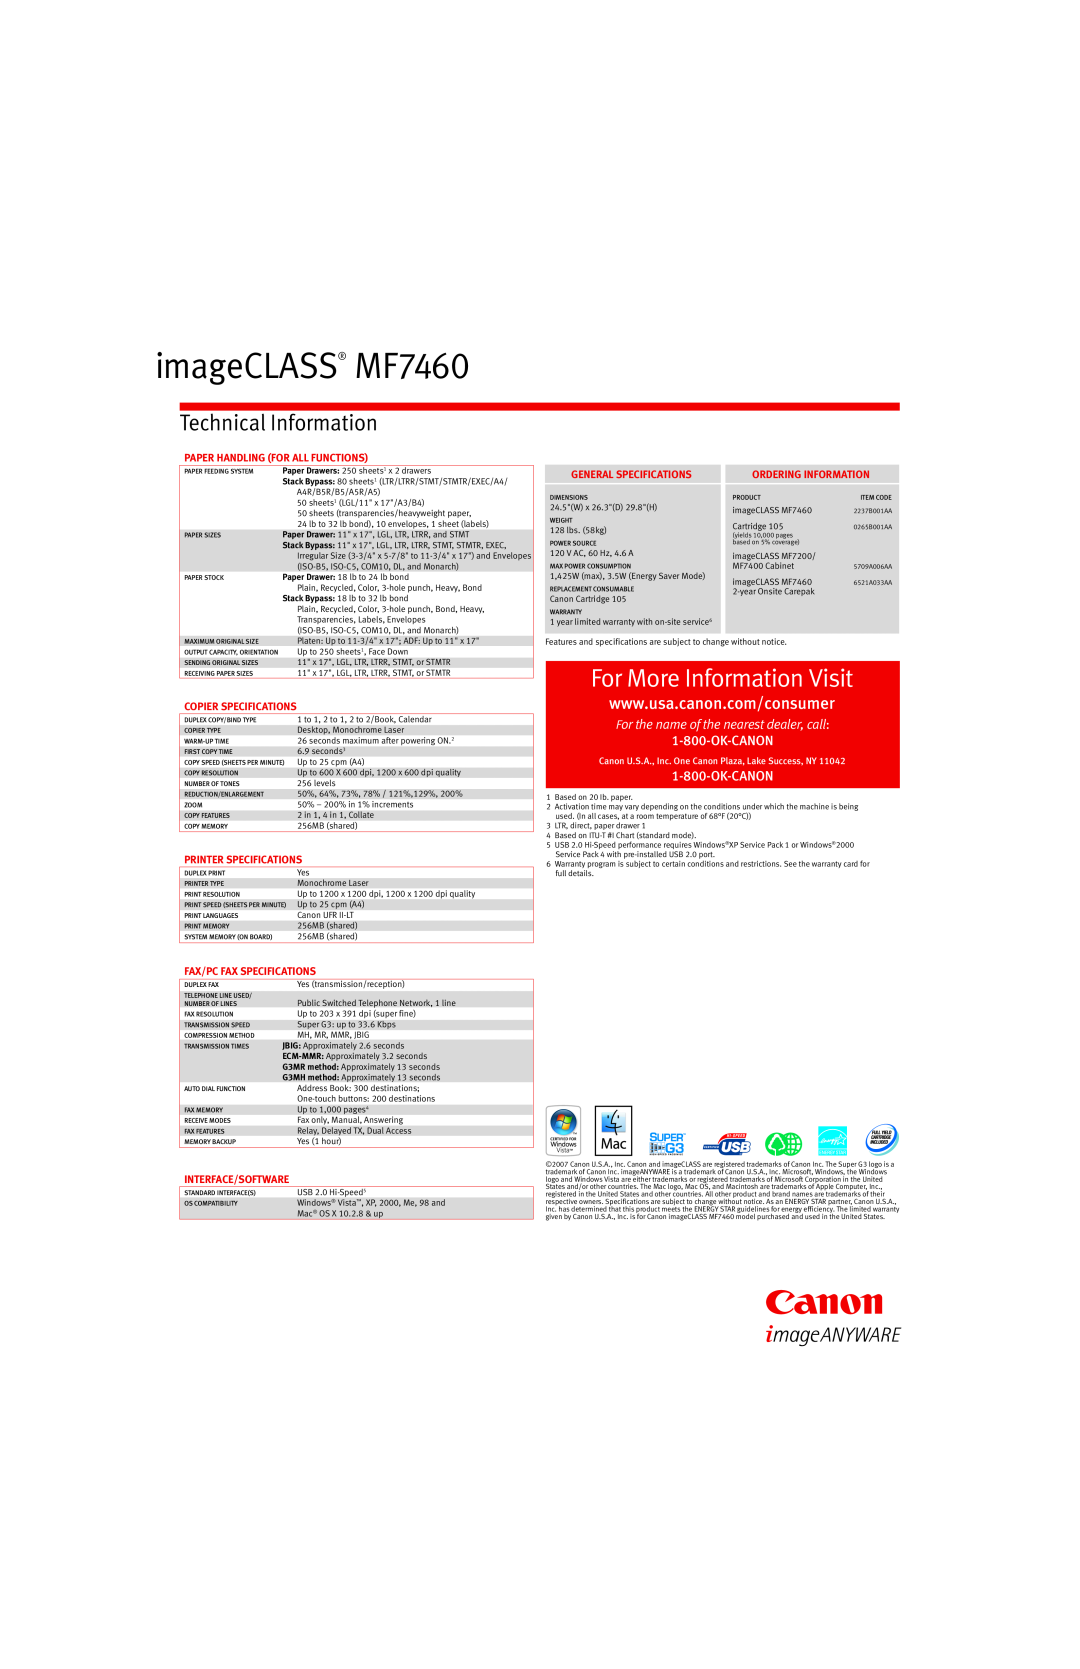 Canon imageCLASS MF7460, For More Information Visit, Technical Information, For the name of the nearest dealer, call 